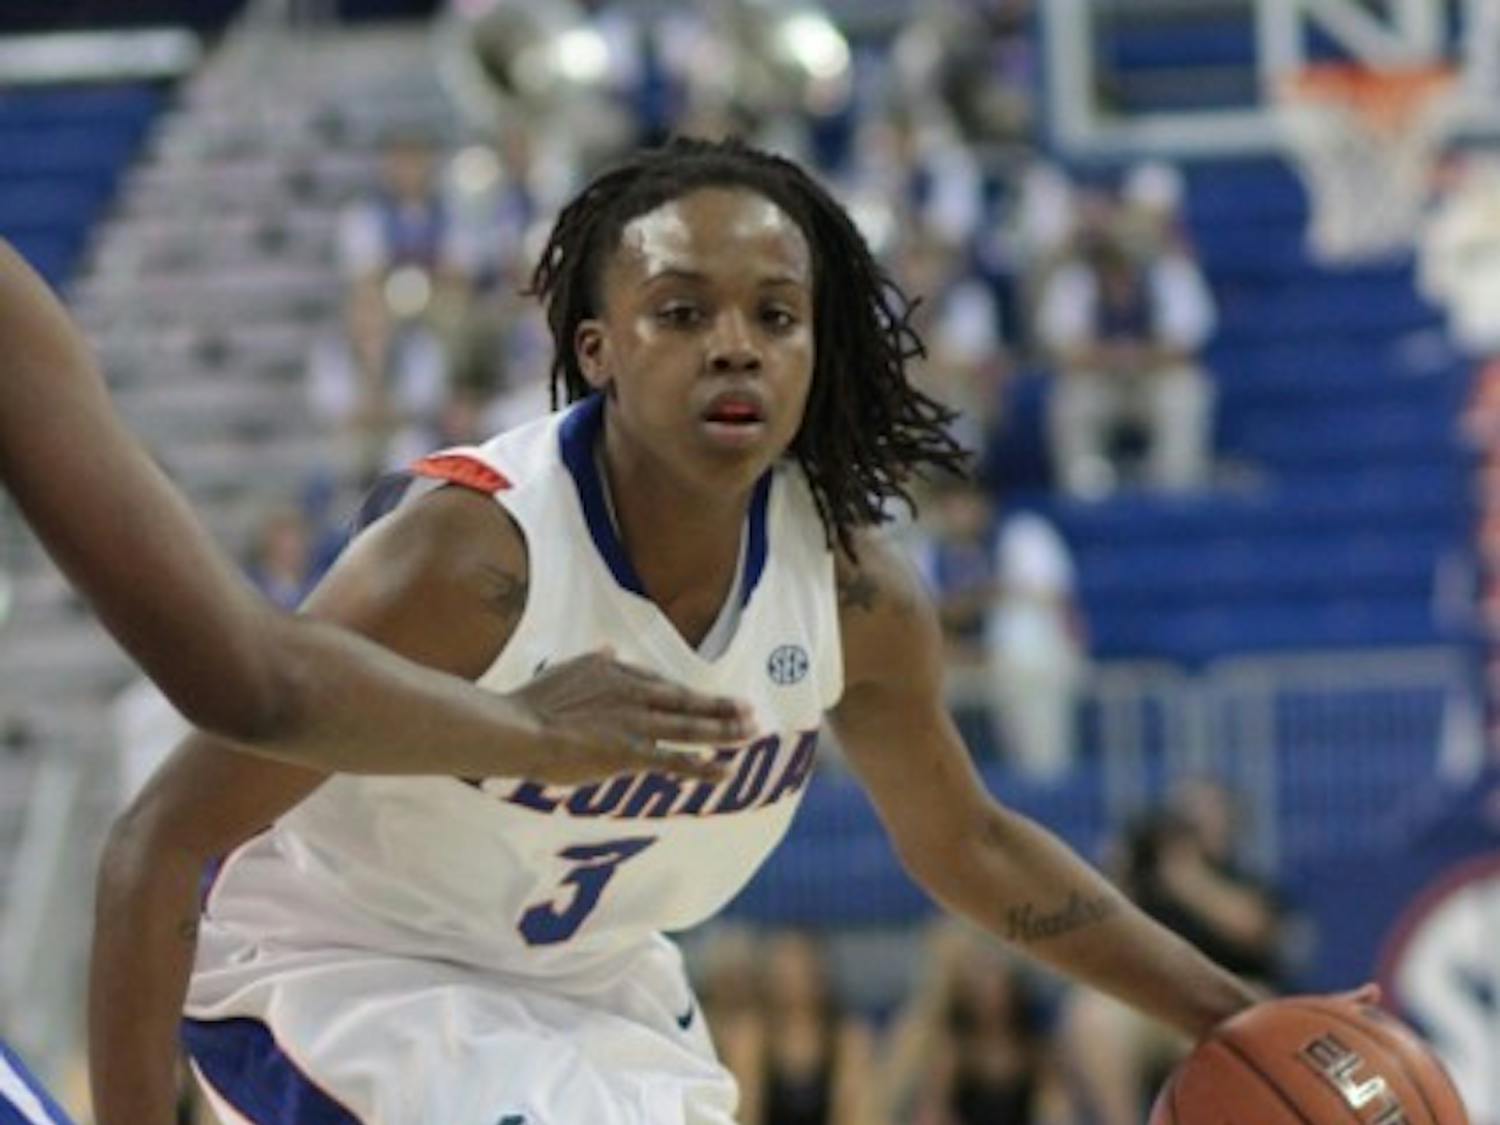 Florida point guard Lanita Bartley led the Gators with 17 points and 10 rebounds in a 84-55 win against Ole Miss on Sunday.